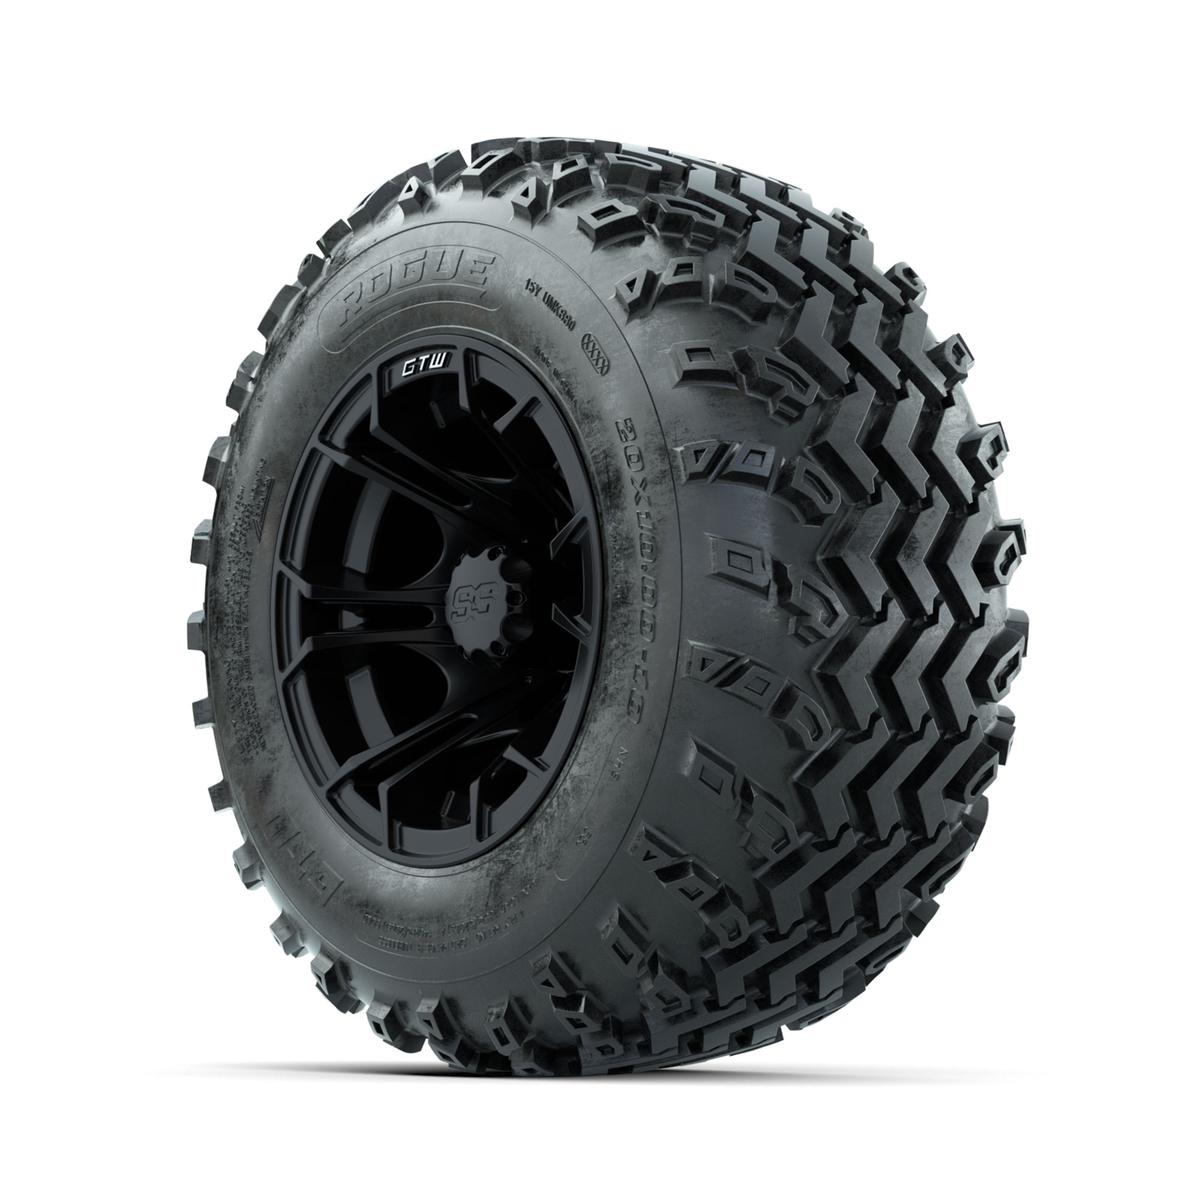 GTW Spyder Matte Black 10 in Wheels with 20x10.00-10 Rogue All Terrain Tires – Full Set